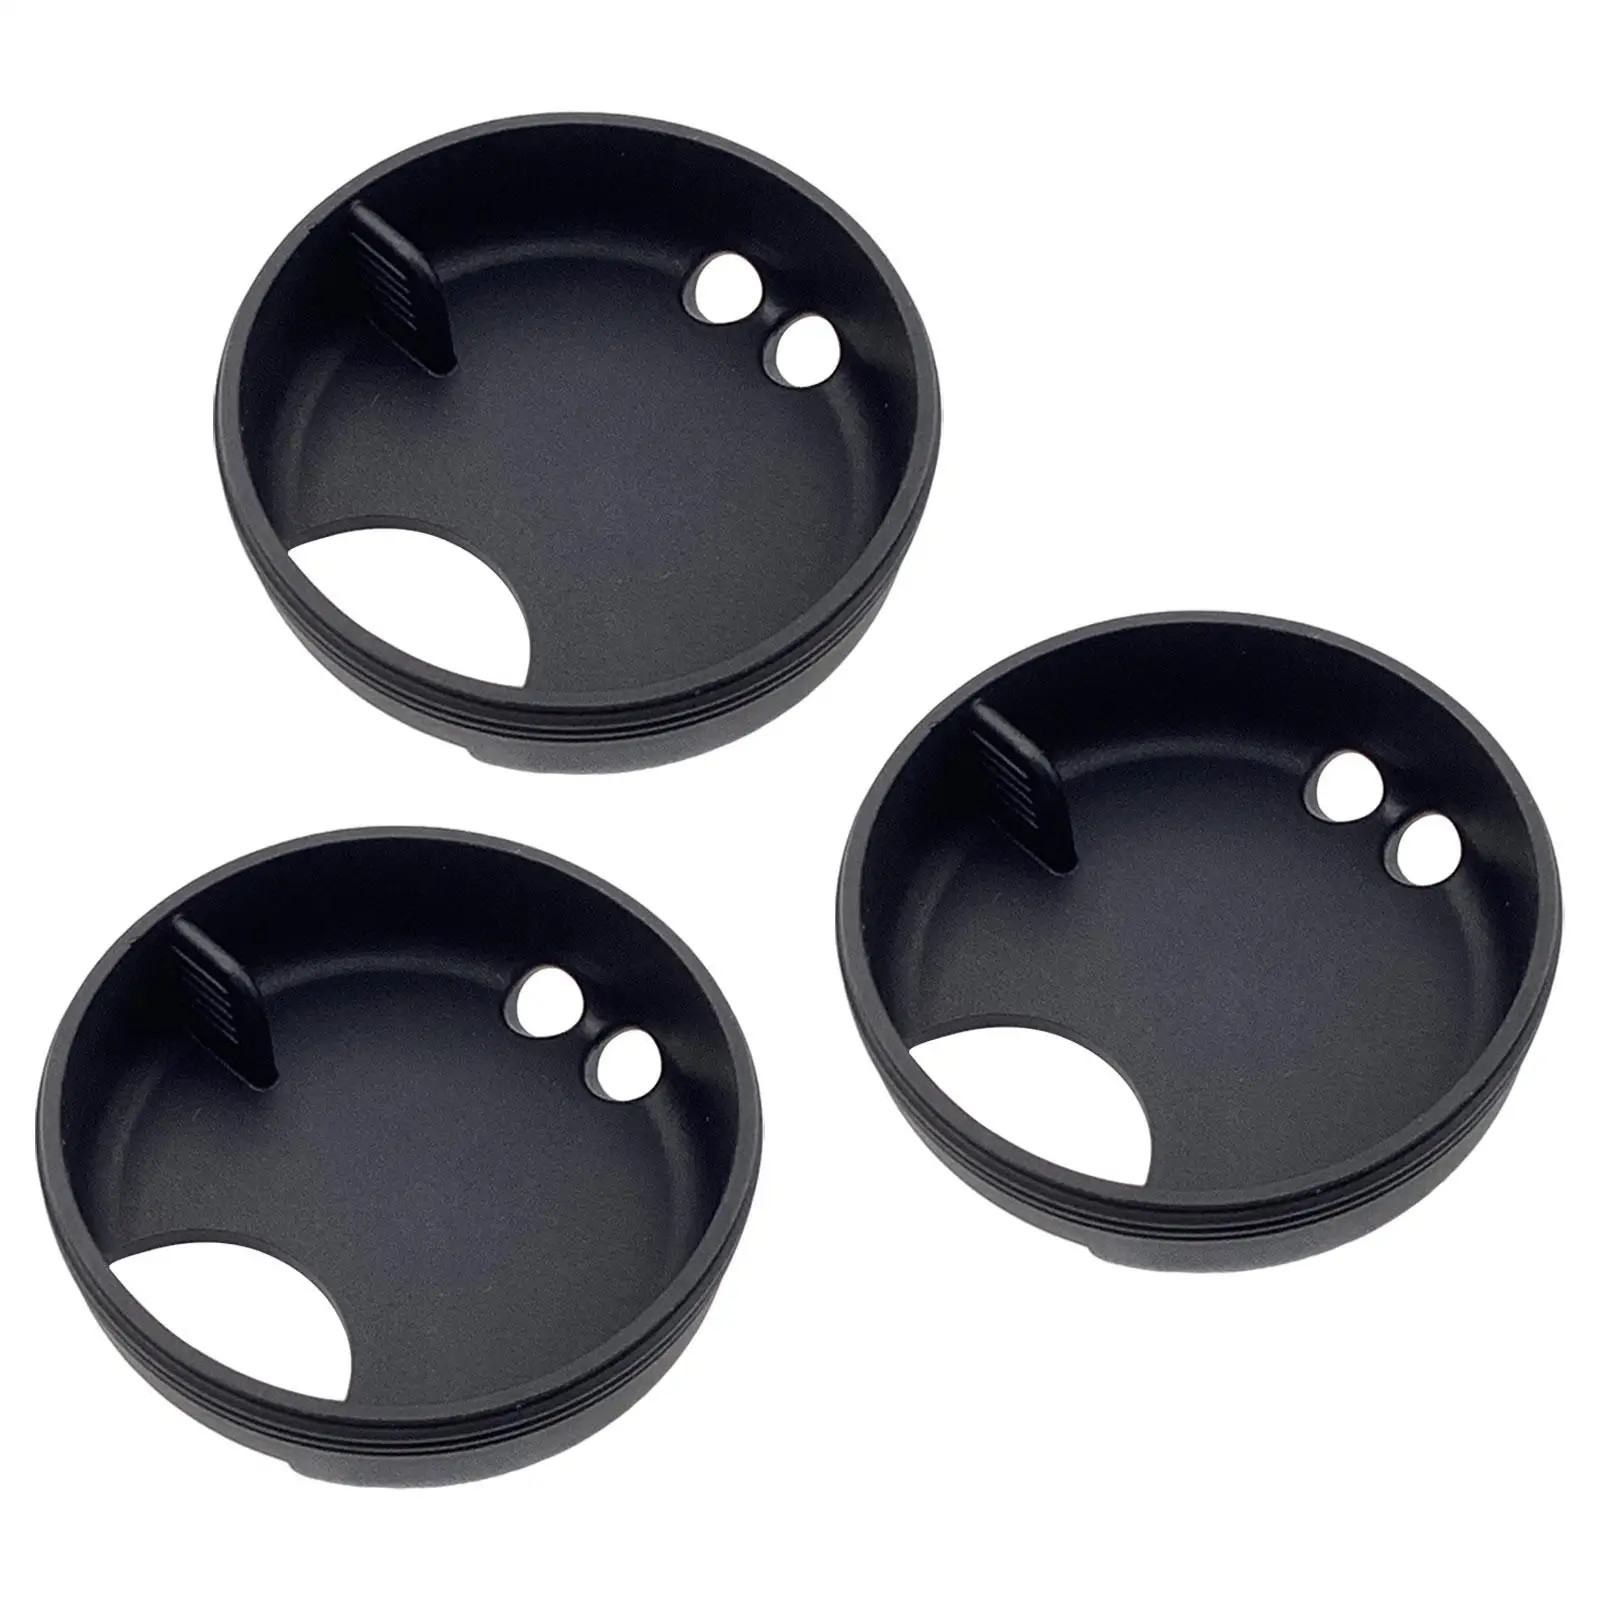 3x Silicone Mouth Splash Guard Replace Spare Parts 53mm Lightweight Water Bottles Accessory Duable Replacement Cap Drinks Cap